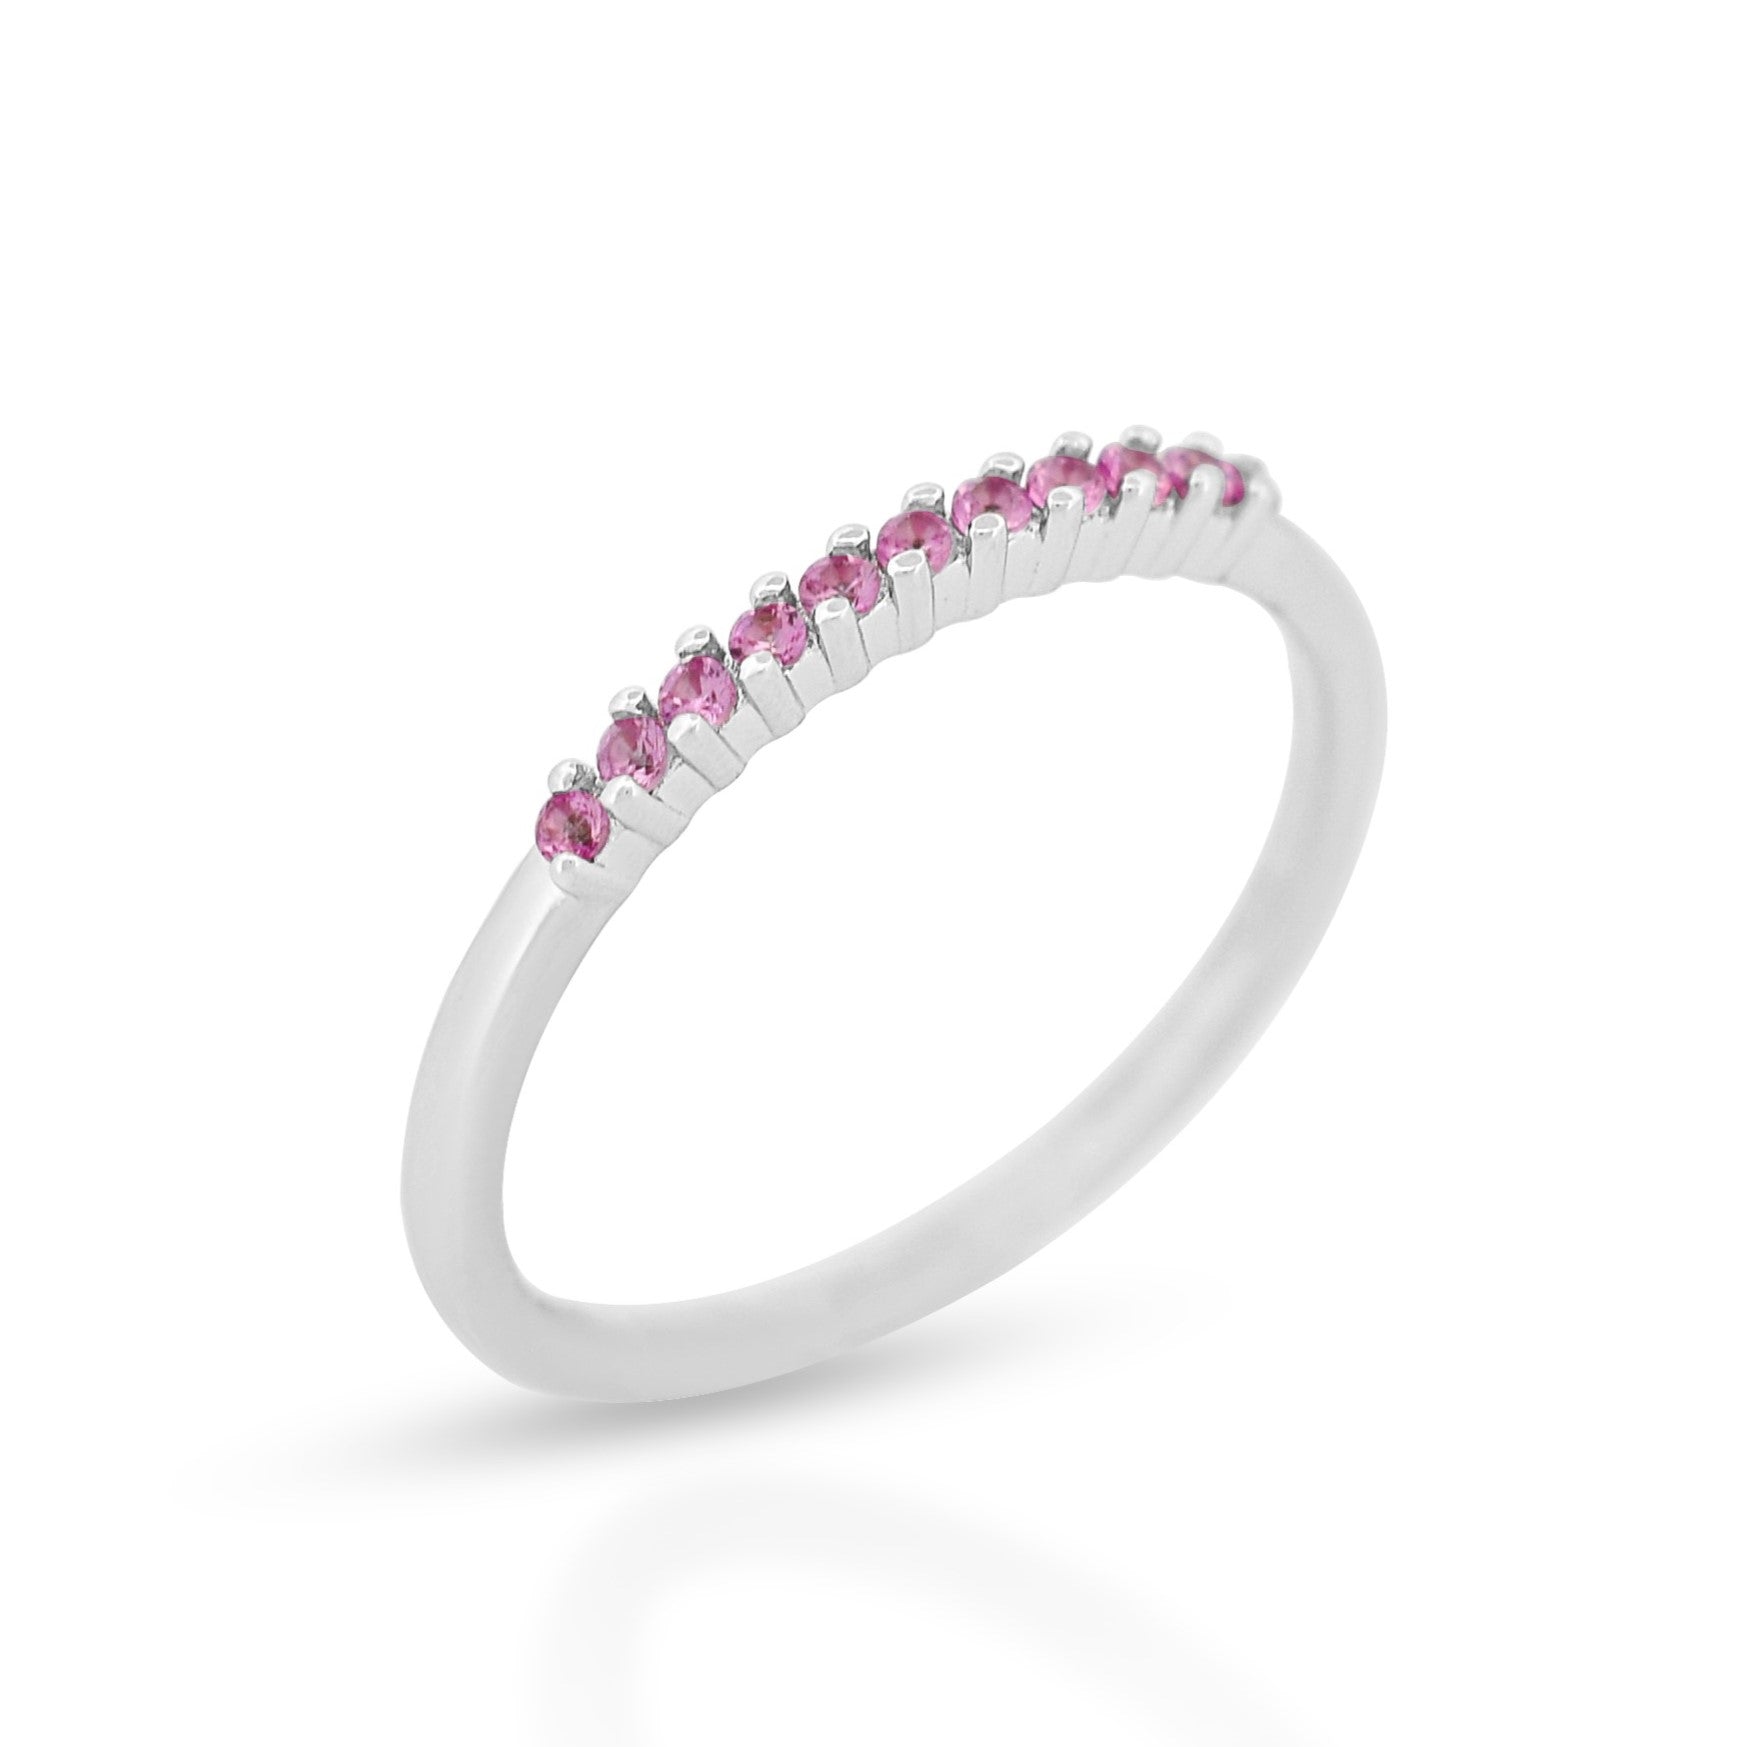 Mini Sapphire Stack Ring in Sterling Silver Pink